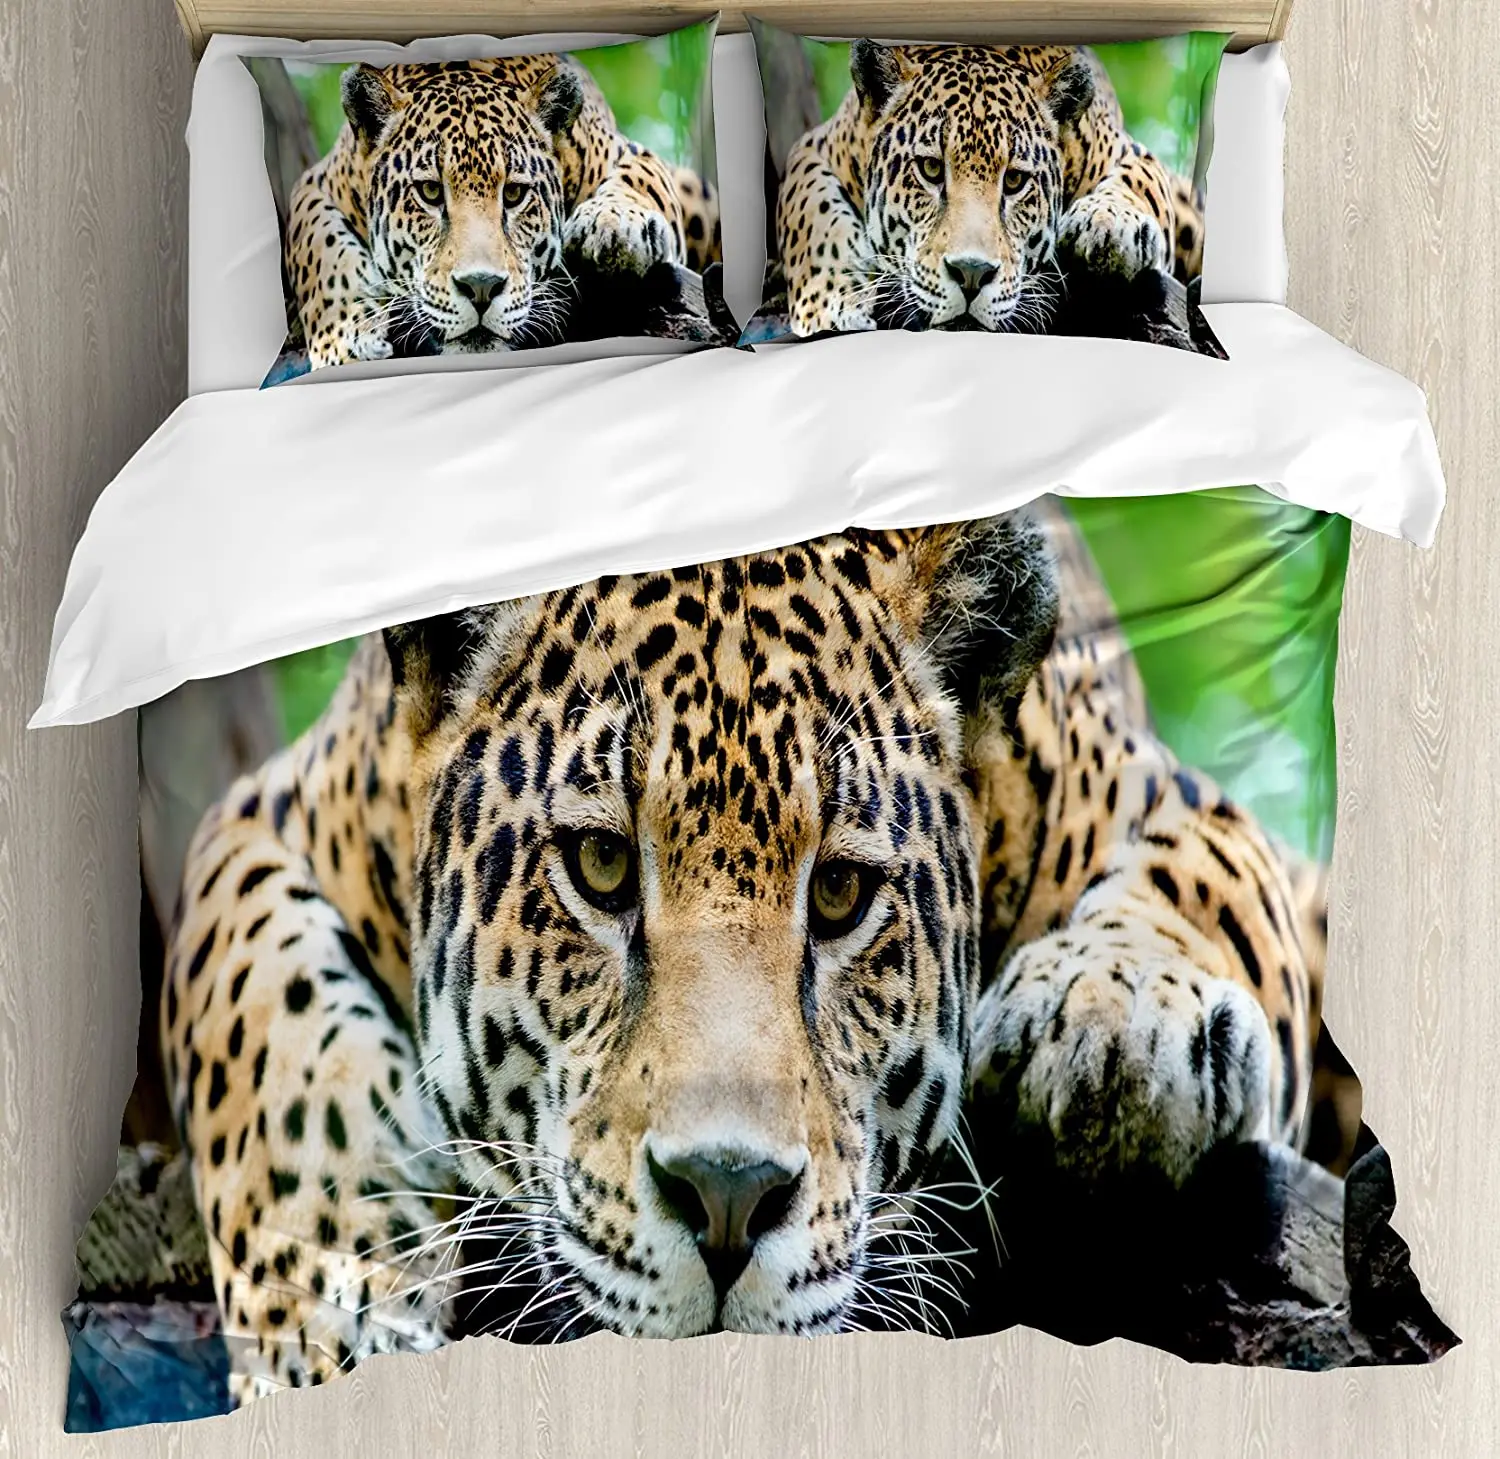 

Jungle Bedding Set For Bedroom Bed Home South American Jaguar Wild Animal Carnivore Endan Duvet Cover Quilt Cover And Pillowcase